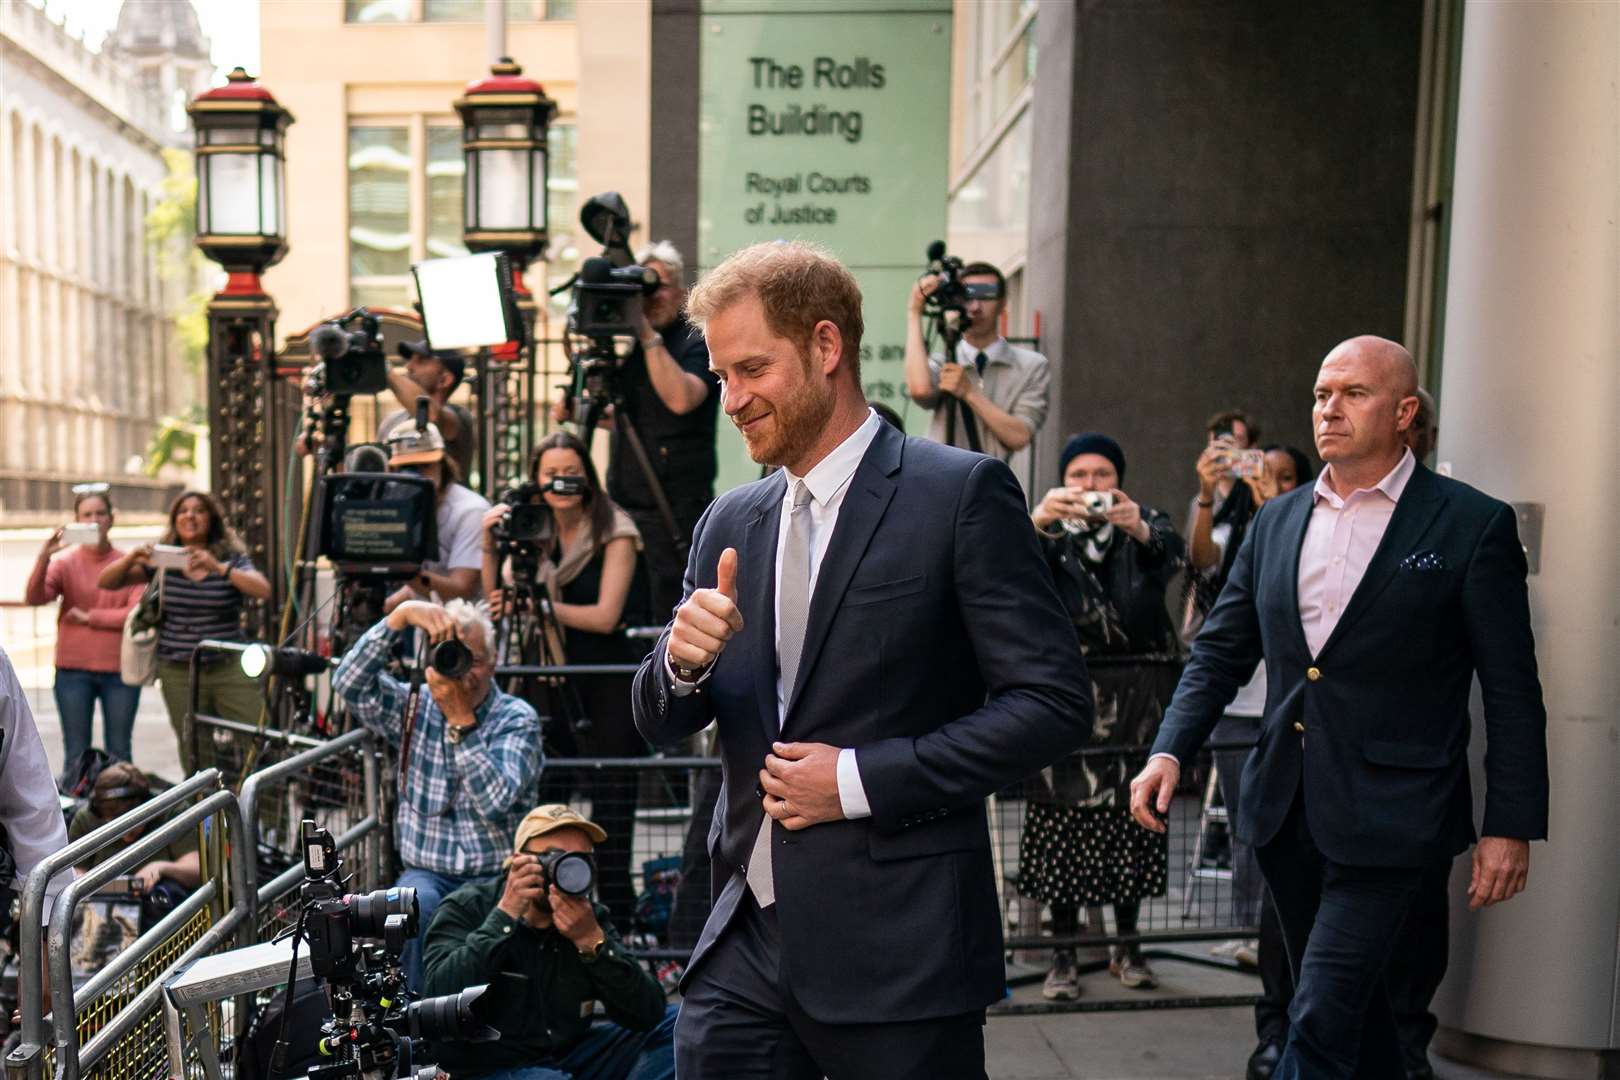 The Duke of Sussex gave evidence in the phone-hacking trial (Aaron Chown/PA)